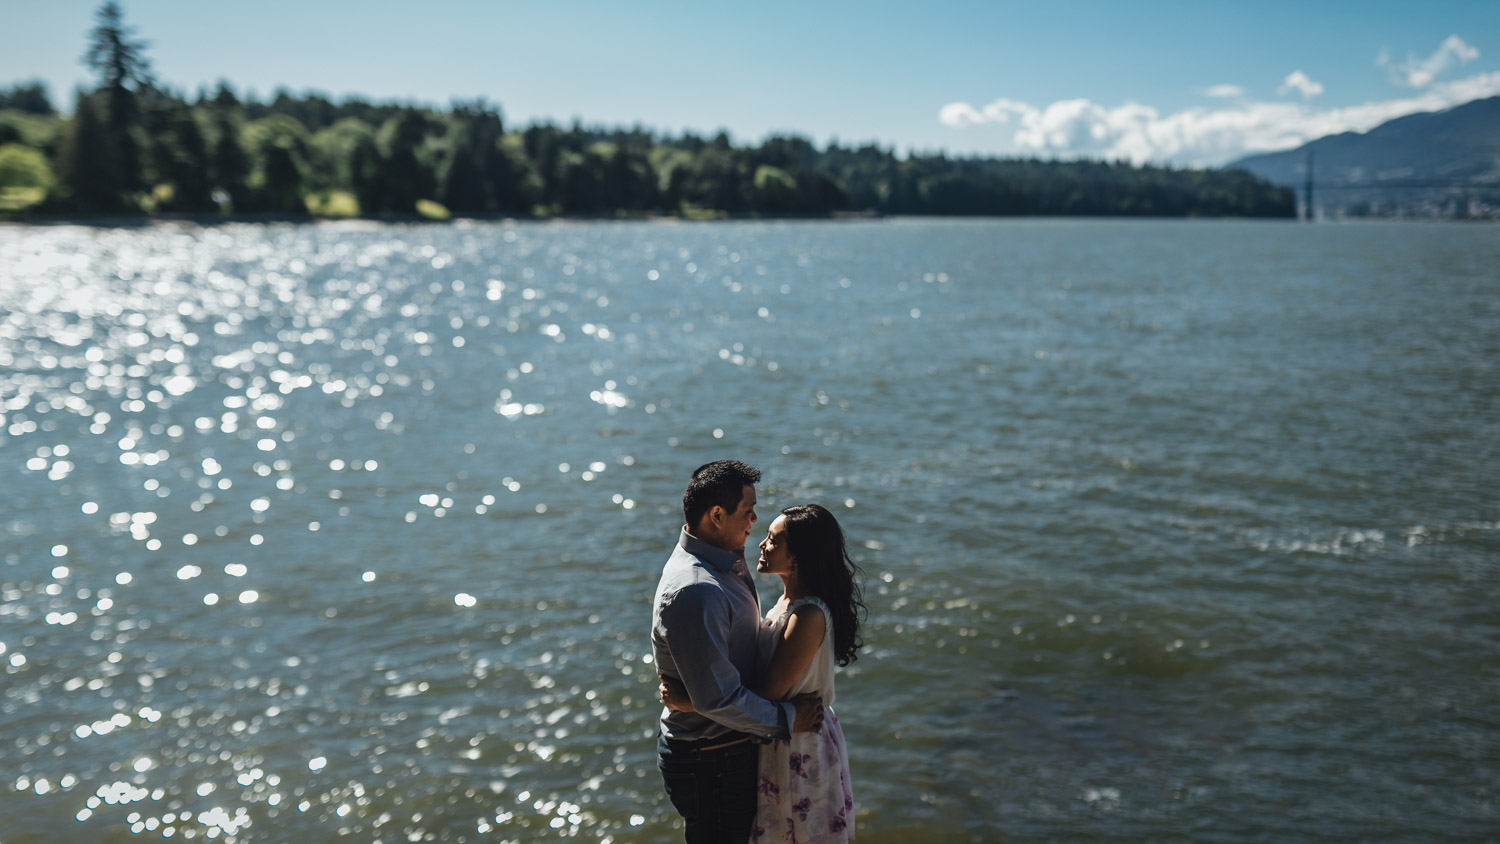 summer engagement photography at stanley park lighthouse vancouver bc